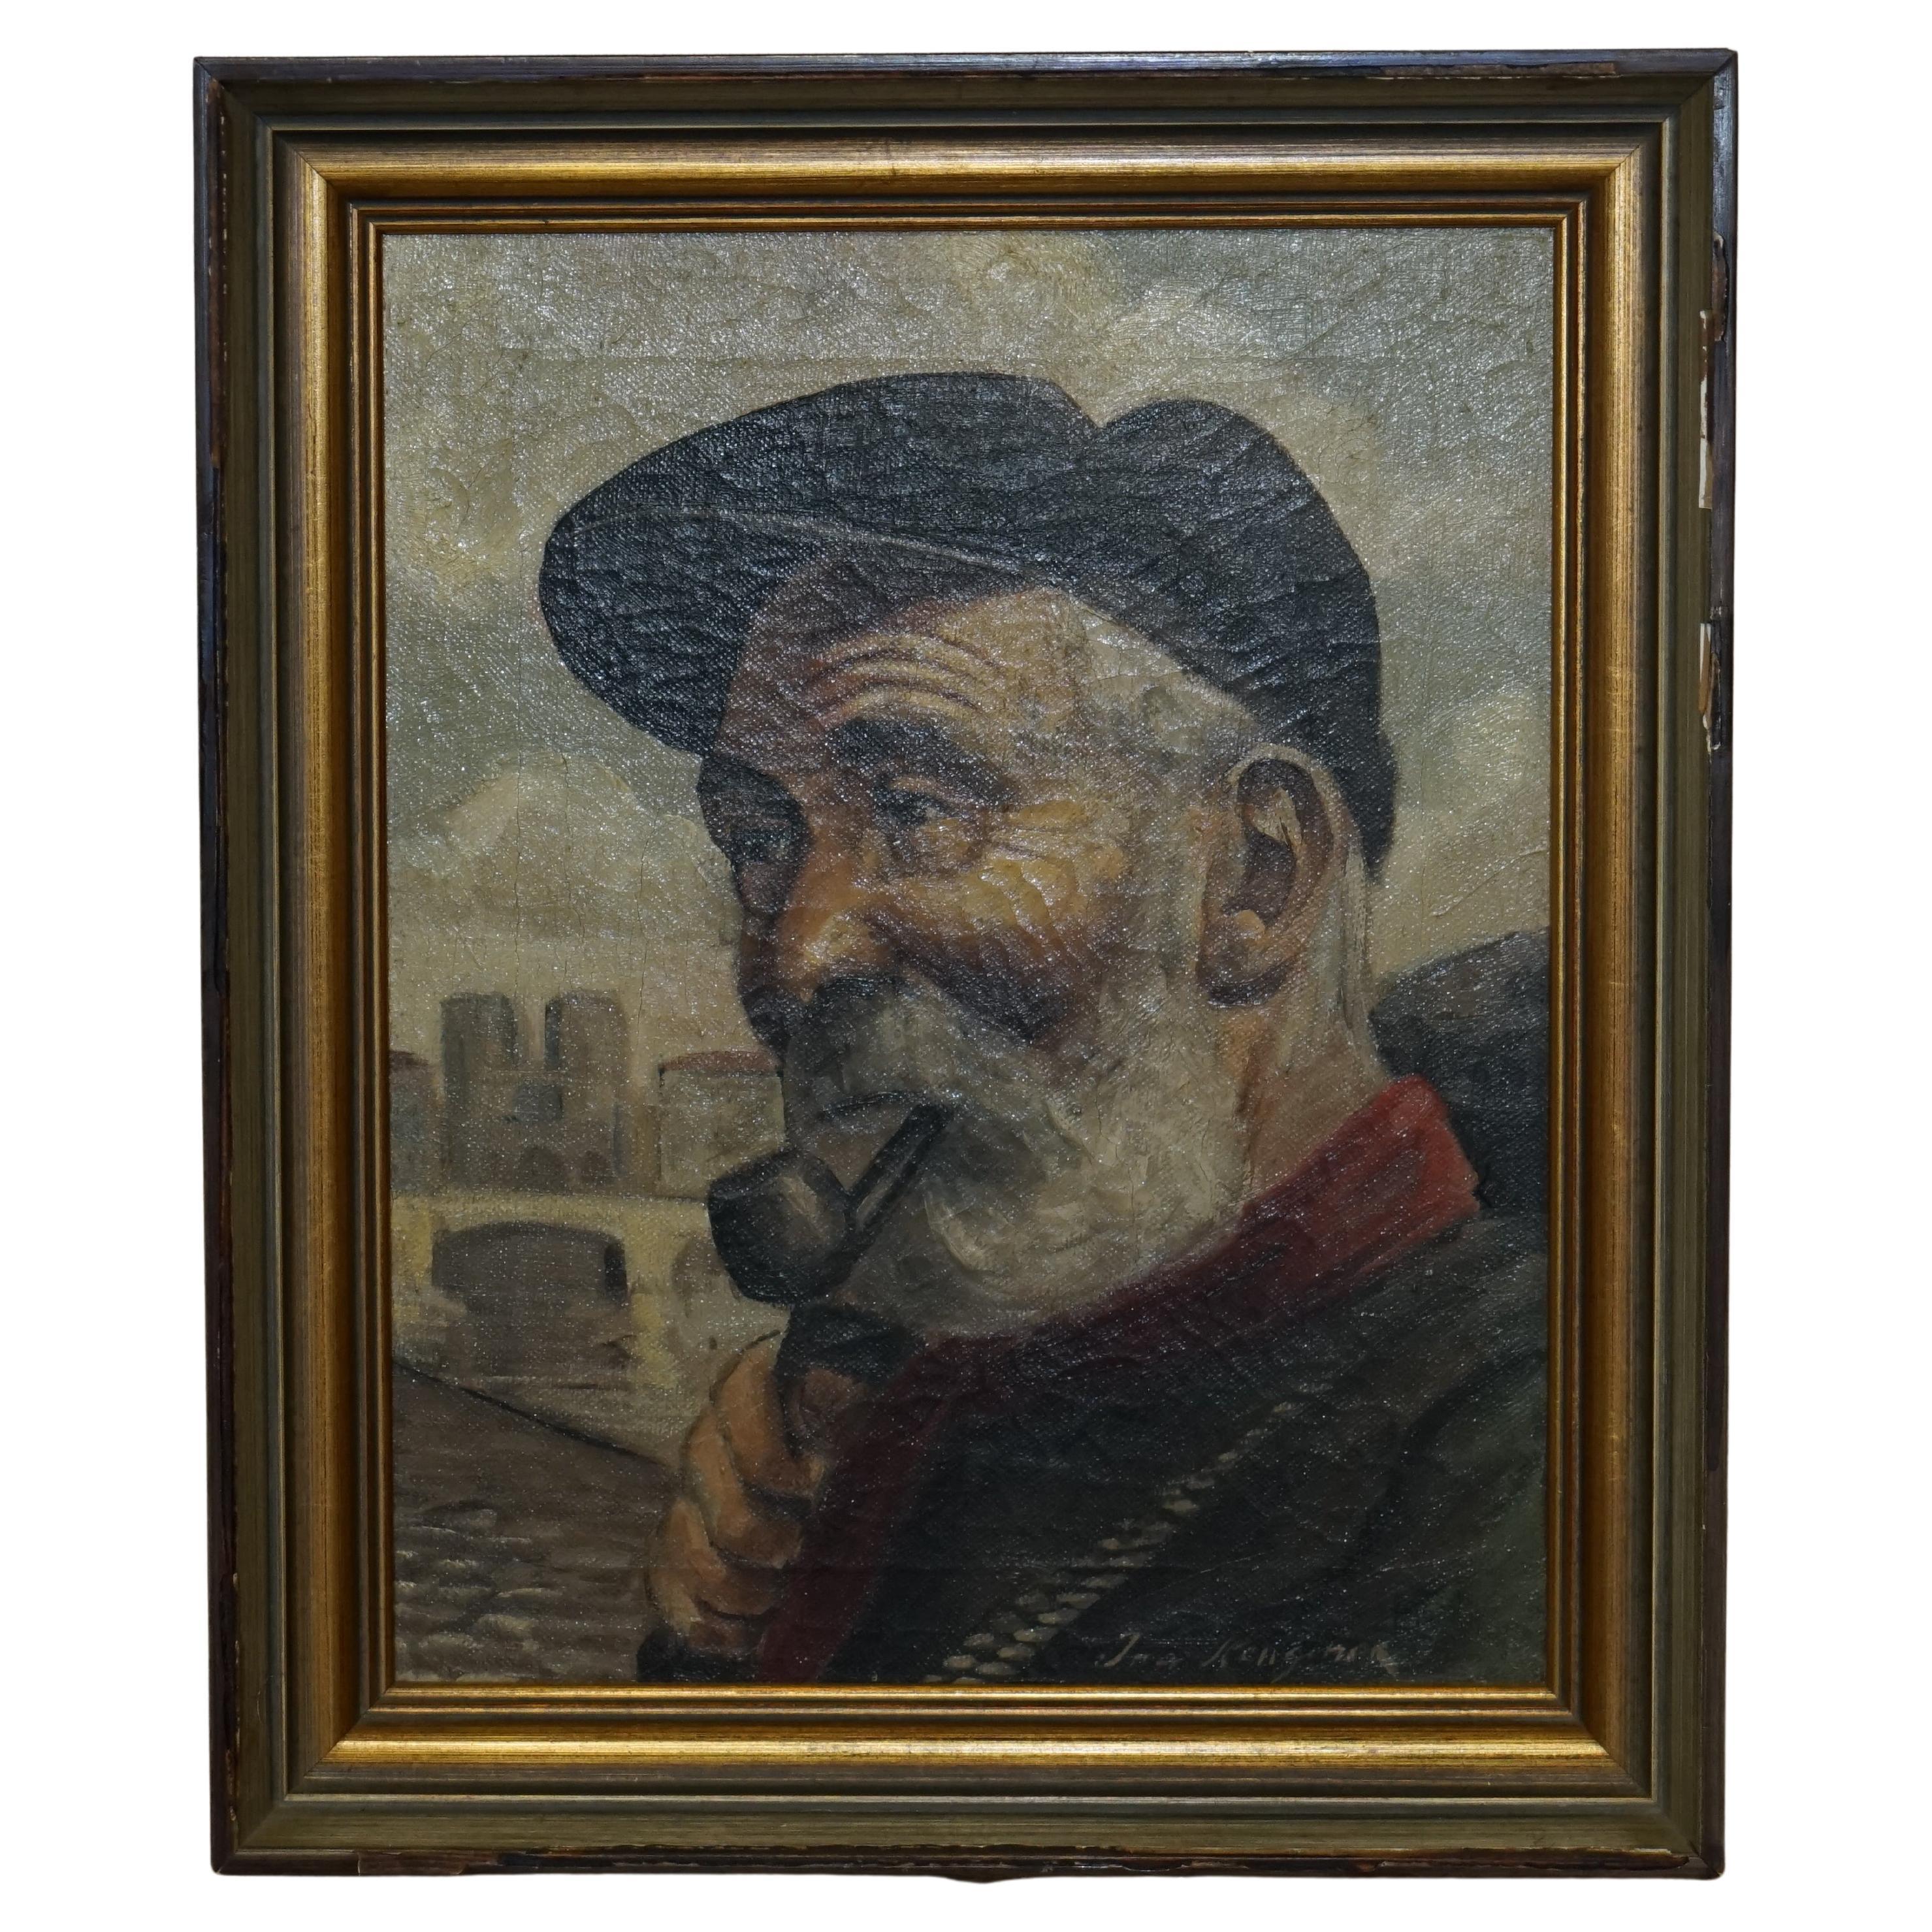 Jma Kensinck Signed Dutch Oil on Canvas Painting of Old Man Smoking a Pipe For Sale